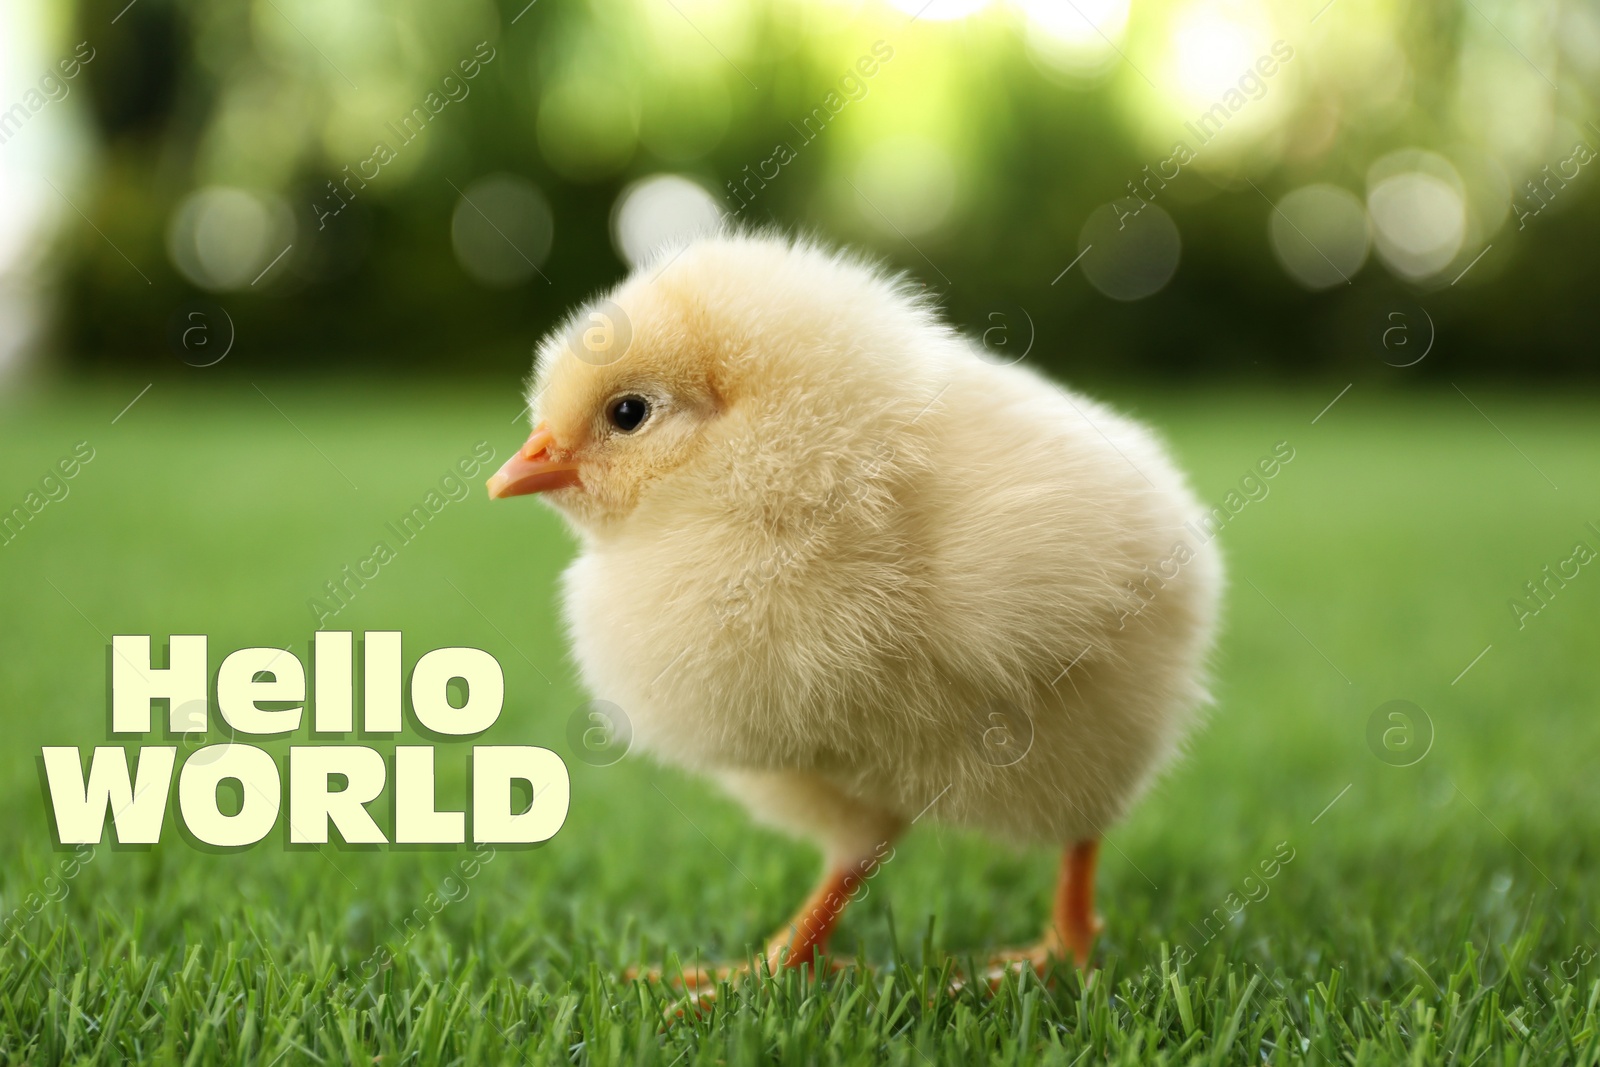 Image of Hello World. Cute fluffy chick on green grass outdoors, closeup